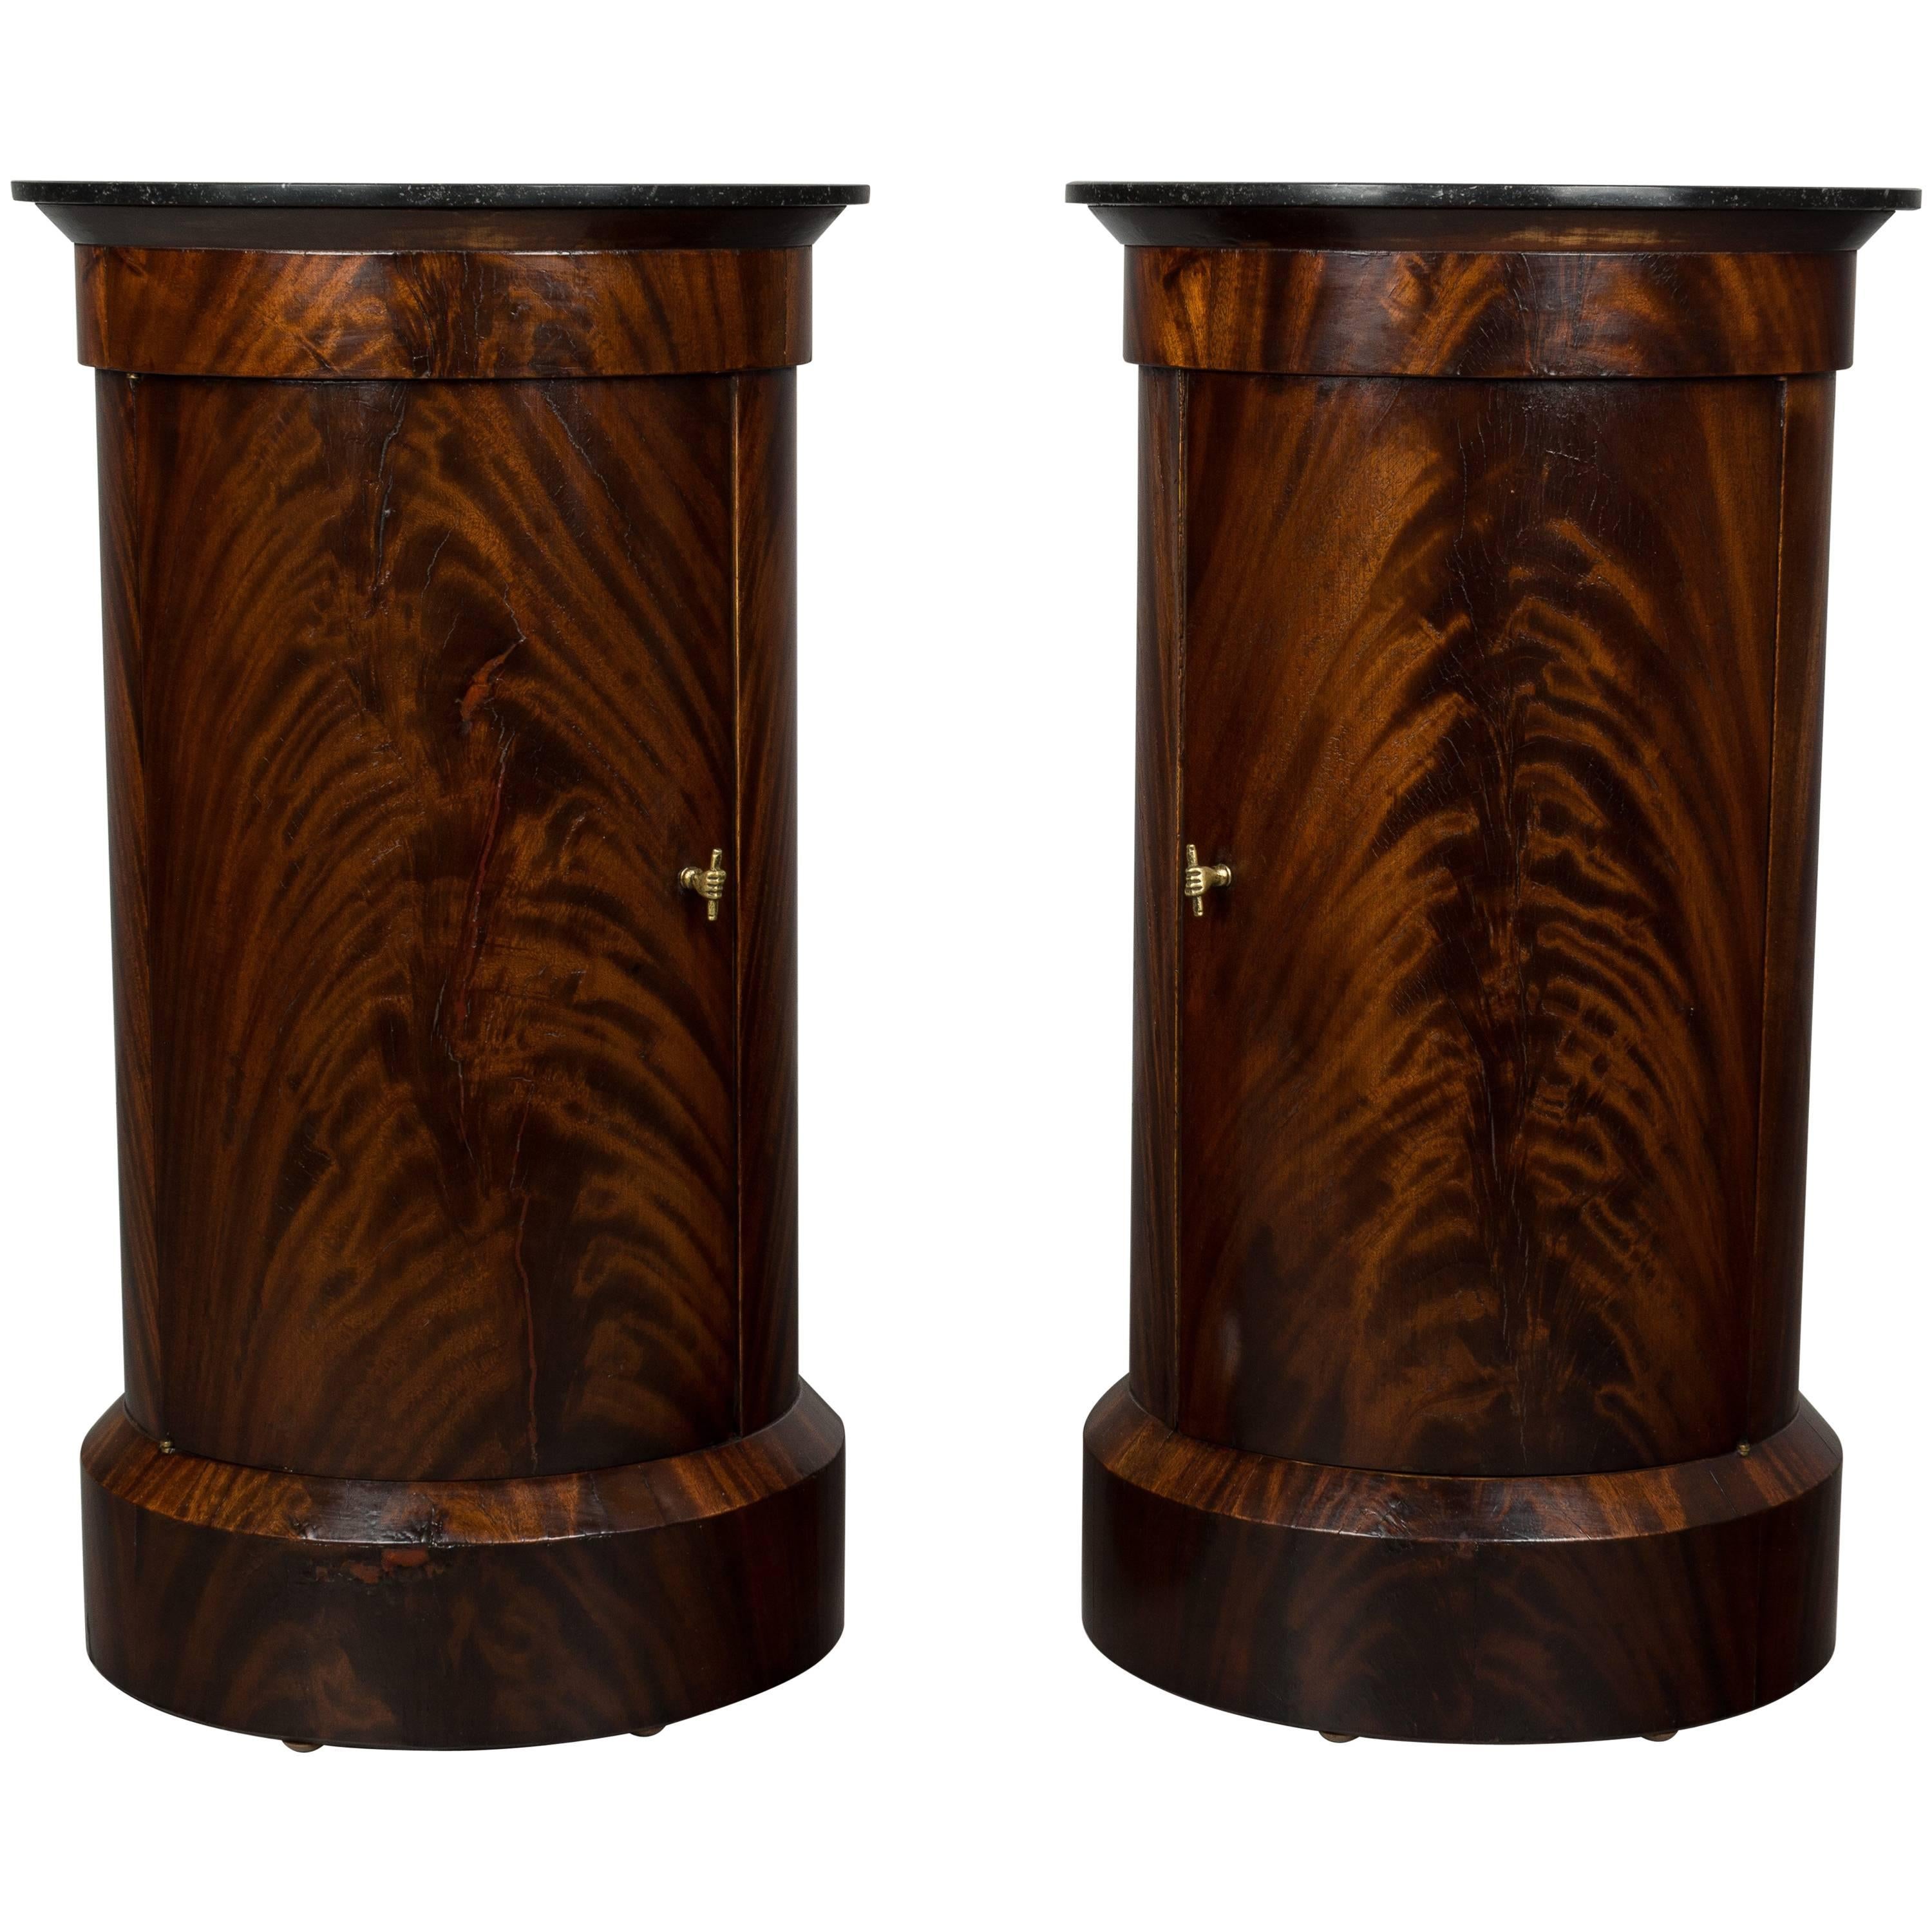 Pair of 19th Century Louis Philippe Style Pedestal Cabinets